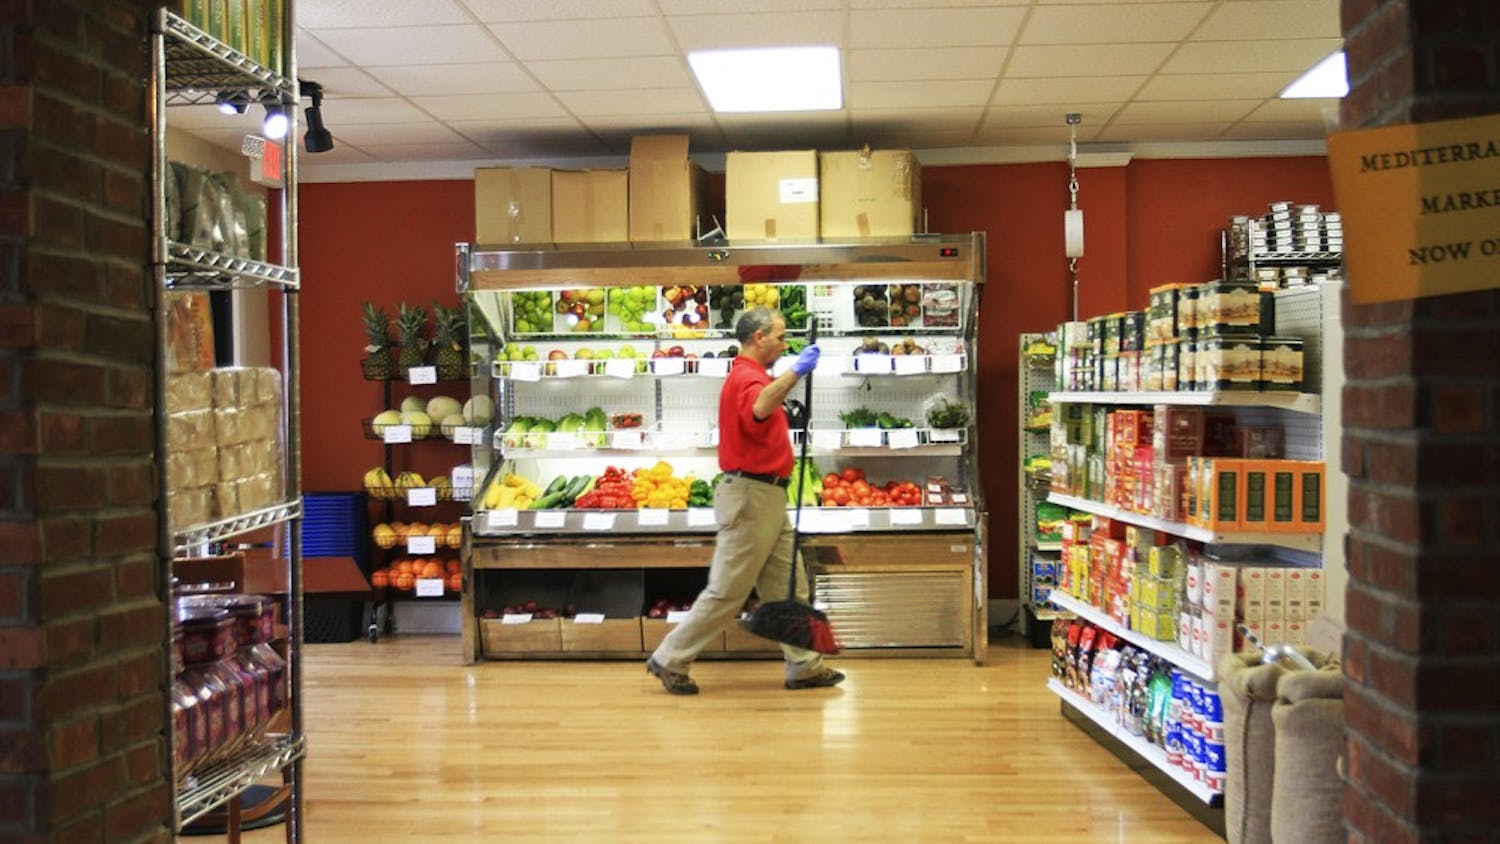 Mohamed Jamili tends to the newly opened Mediterranean Market located within Med Deli on West Franklin Street.